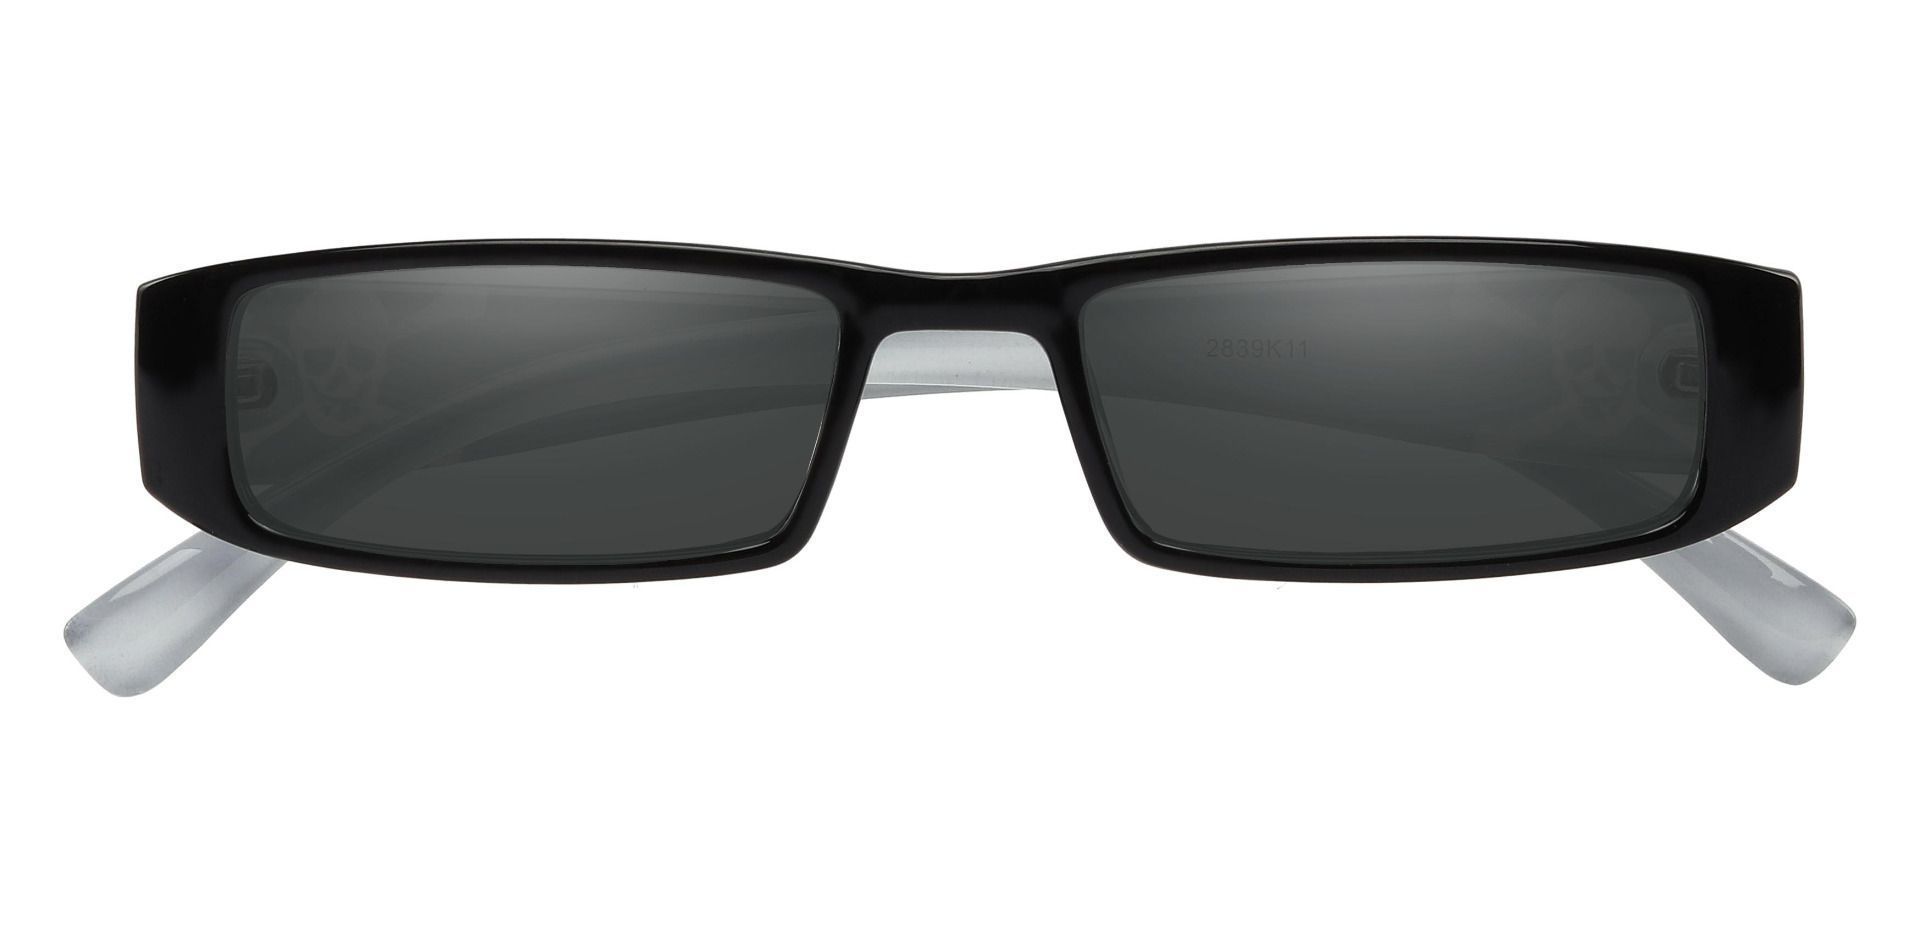 Buccaneer Rectangle Non-Rx Sunglasses - Black Frame With Gray Lenses